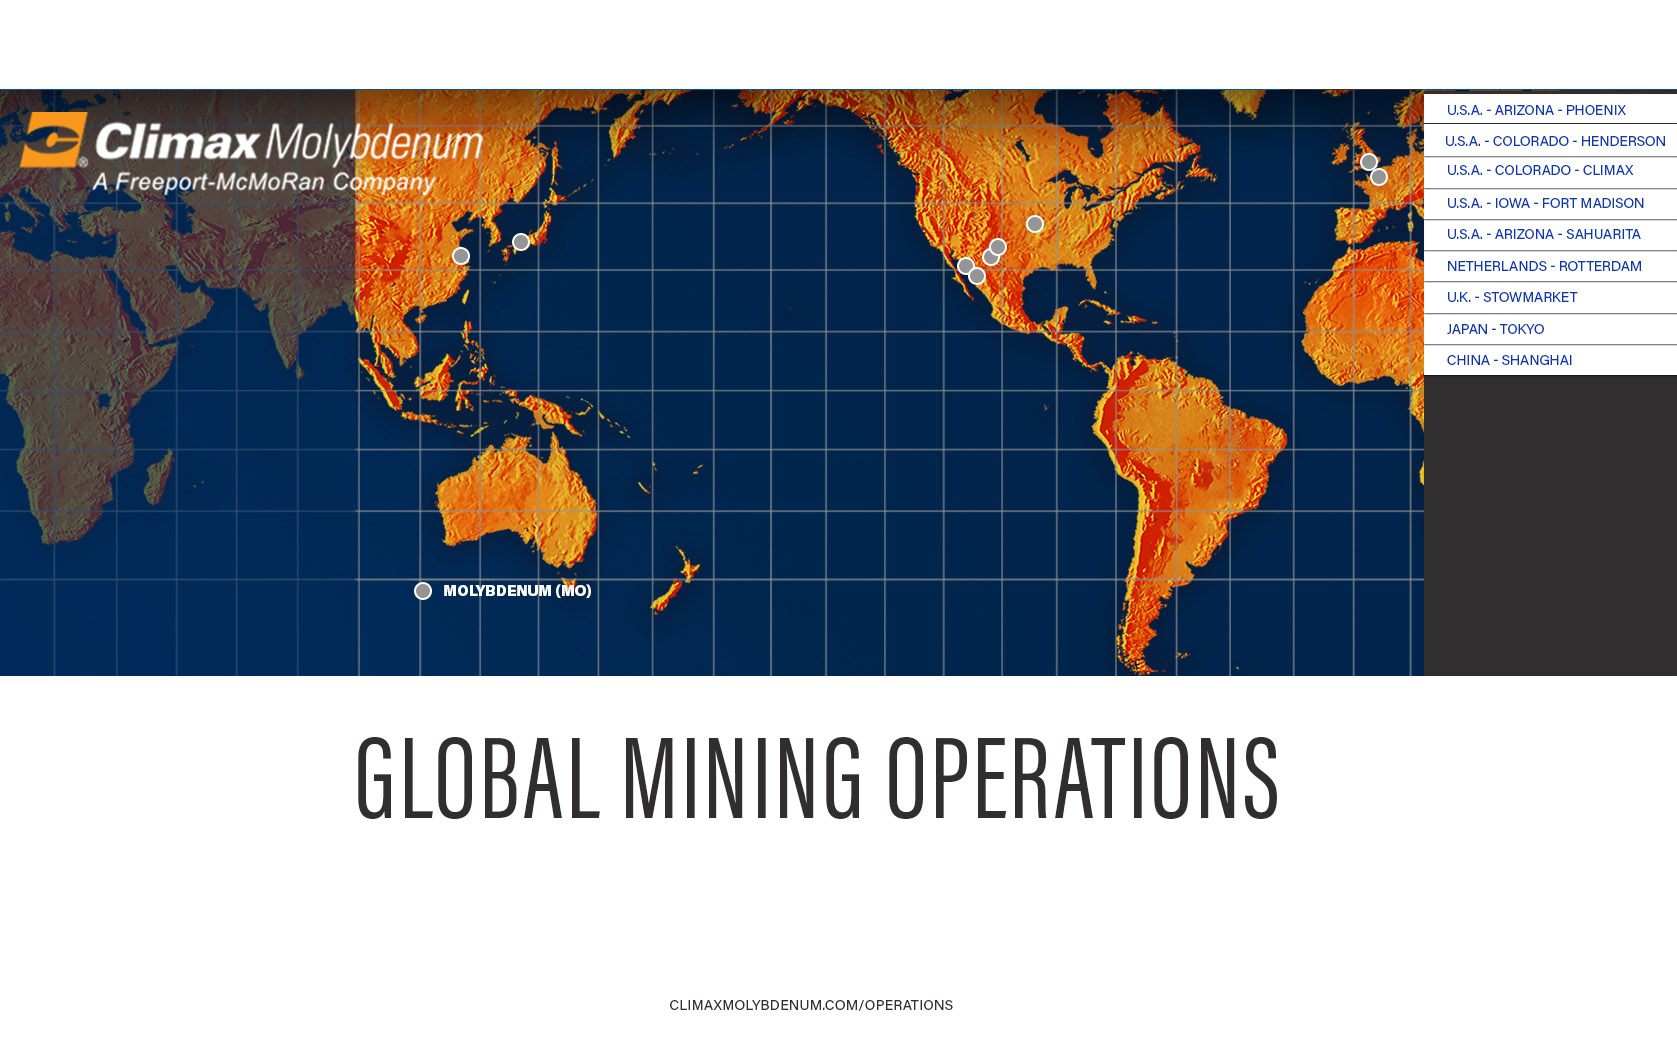 Climax Molybdenum Company, a subsidiary of Freeport-McMoRan printable operations map